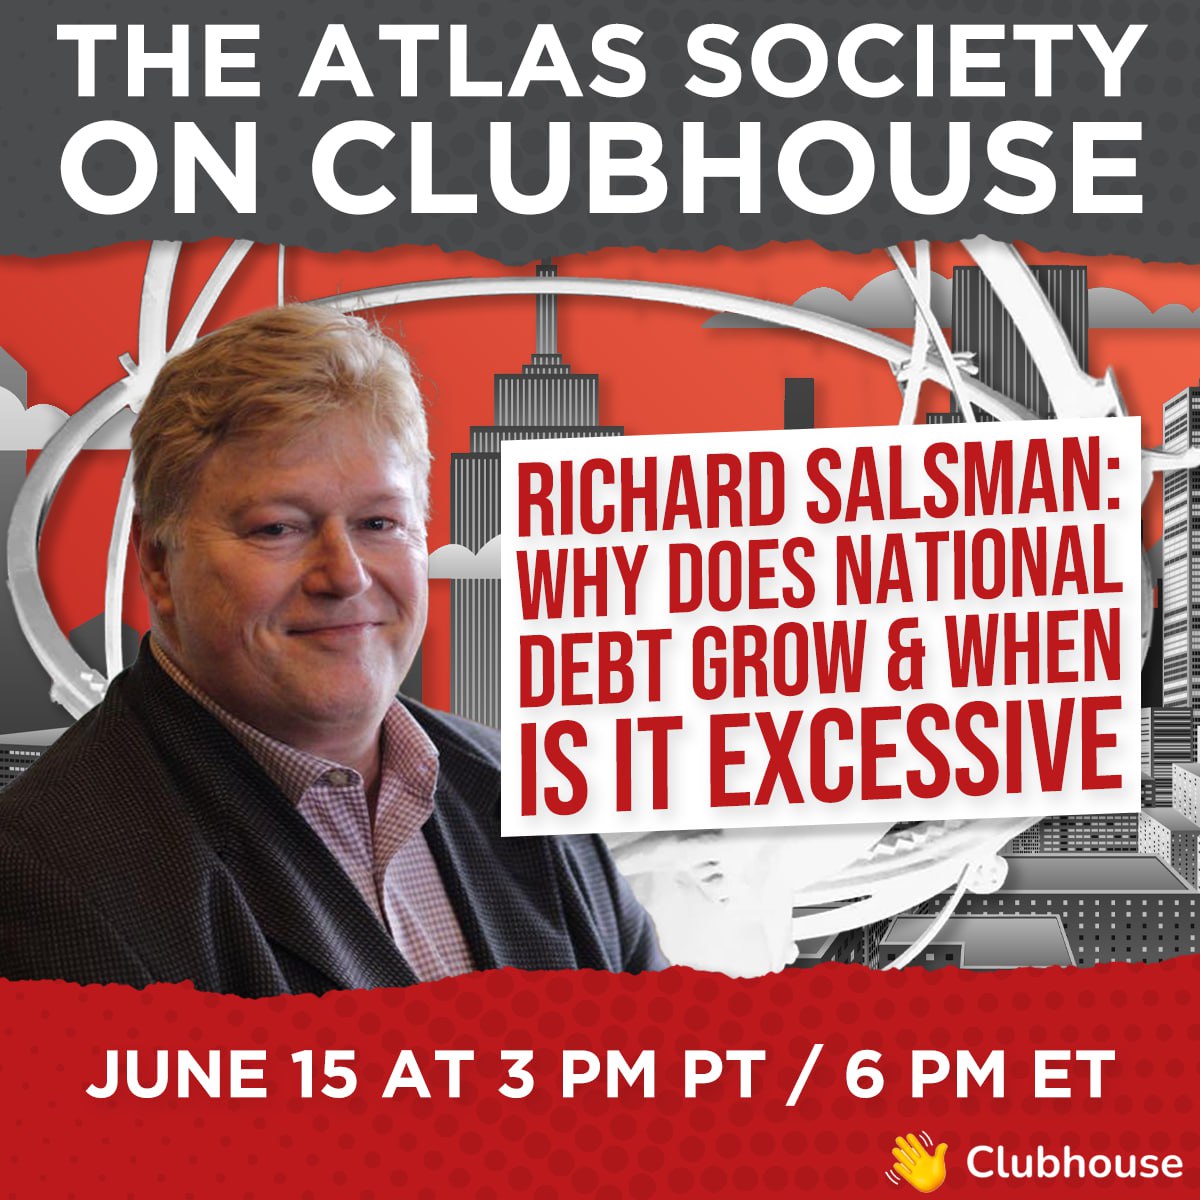 Richard Salsman - Why Does National Debt Grow & When is it Excessive?